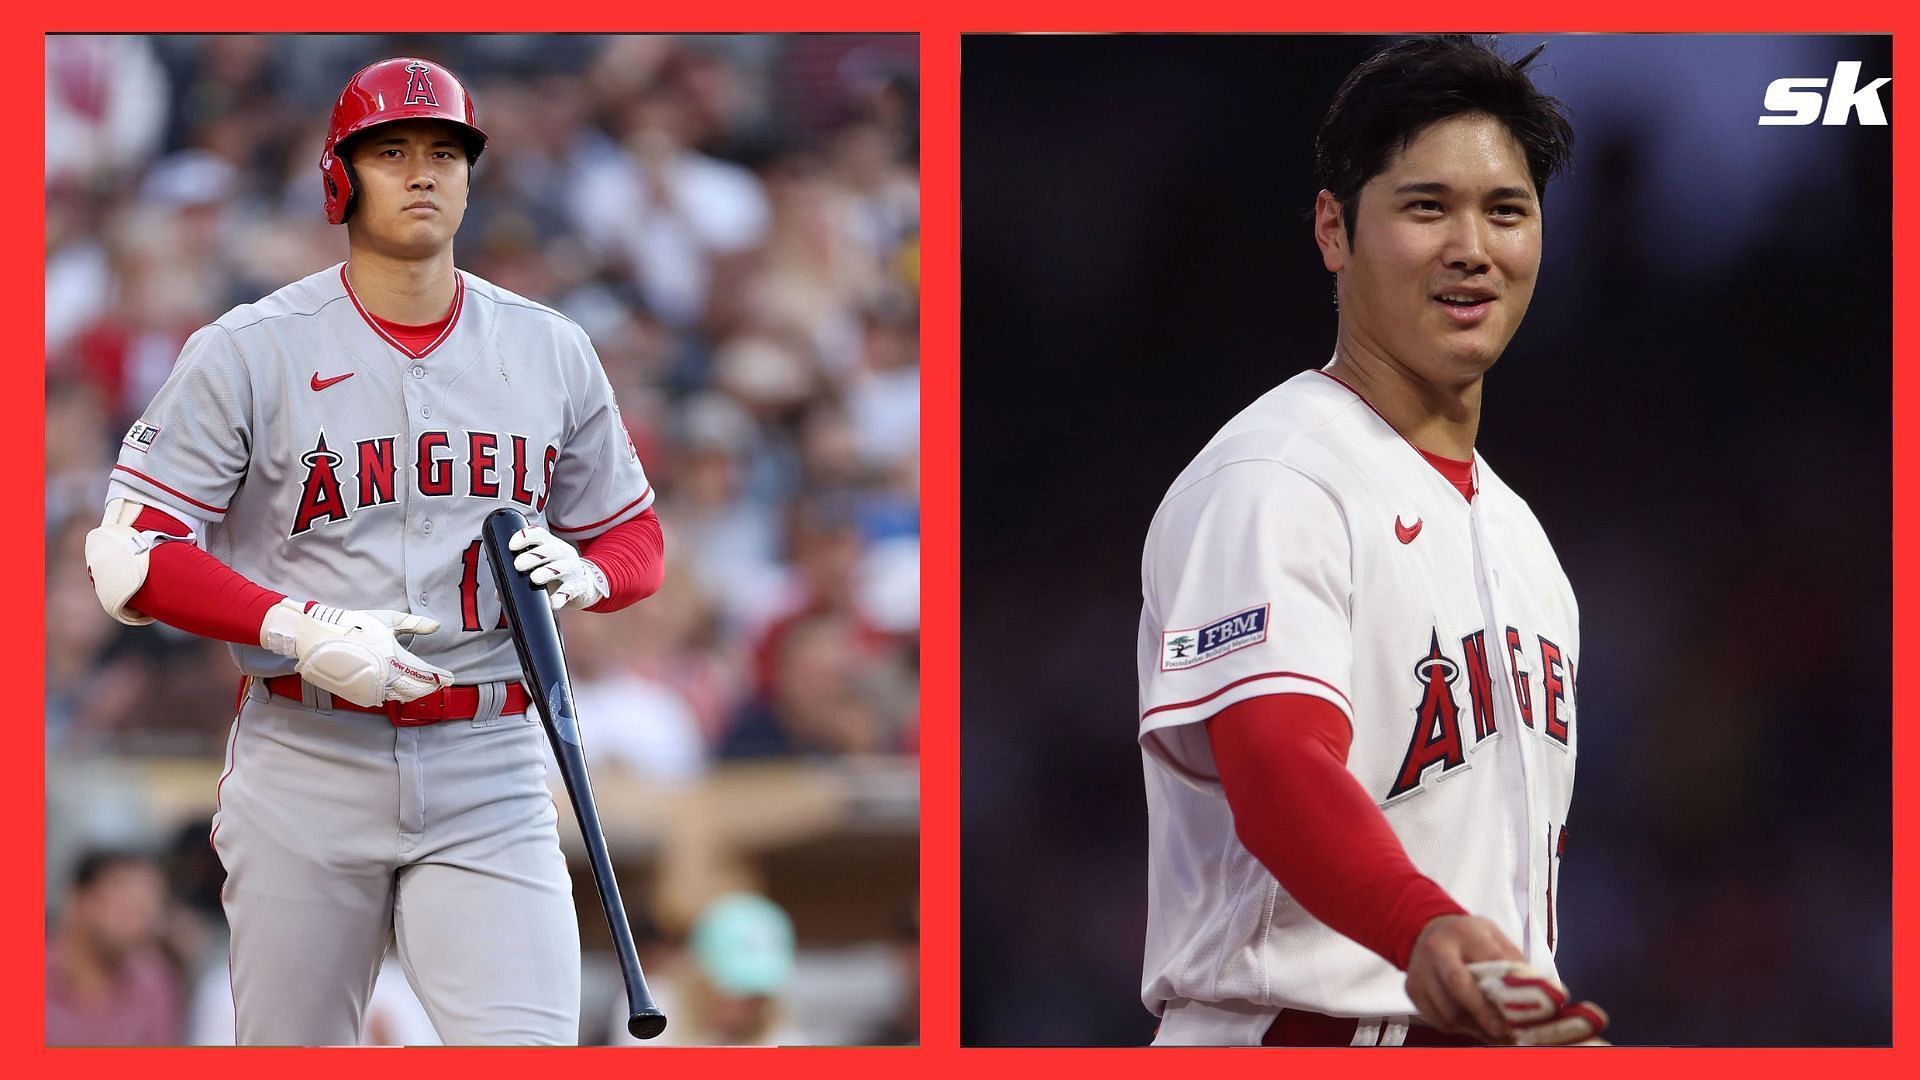 MLB analyst believes Shohei Ohtani needs to be done with the Halos